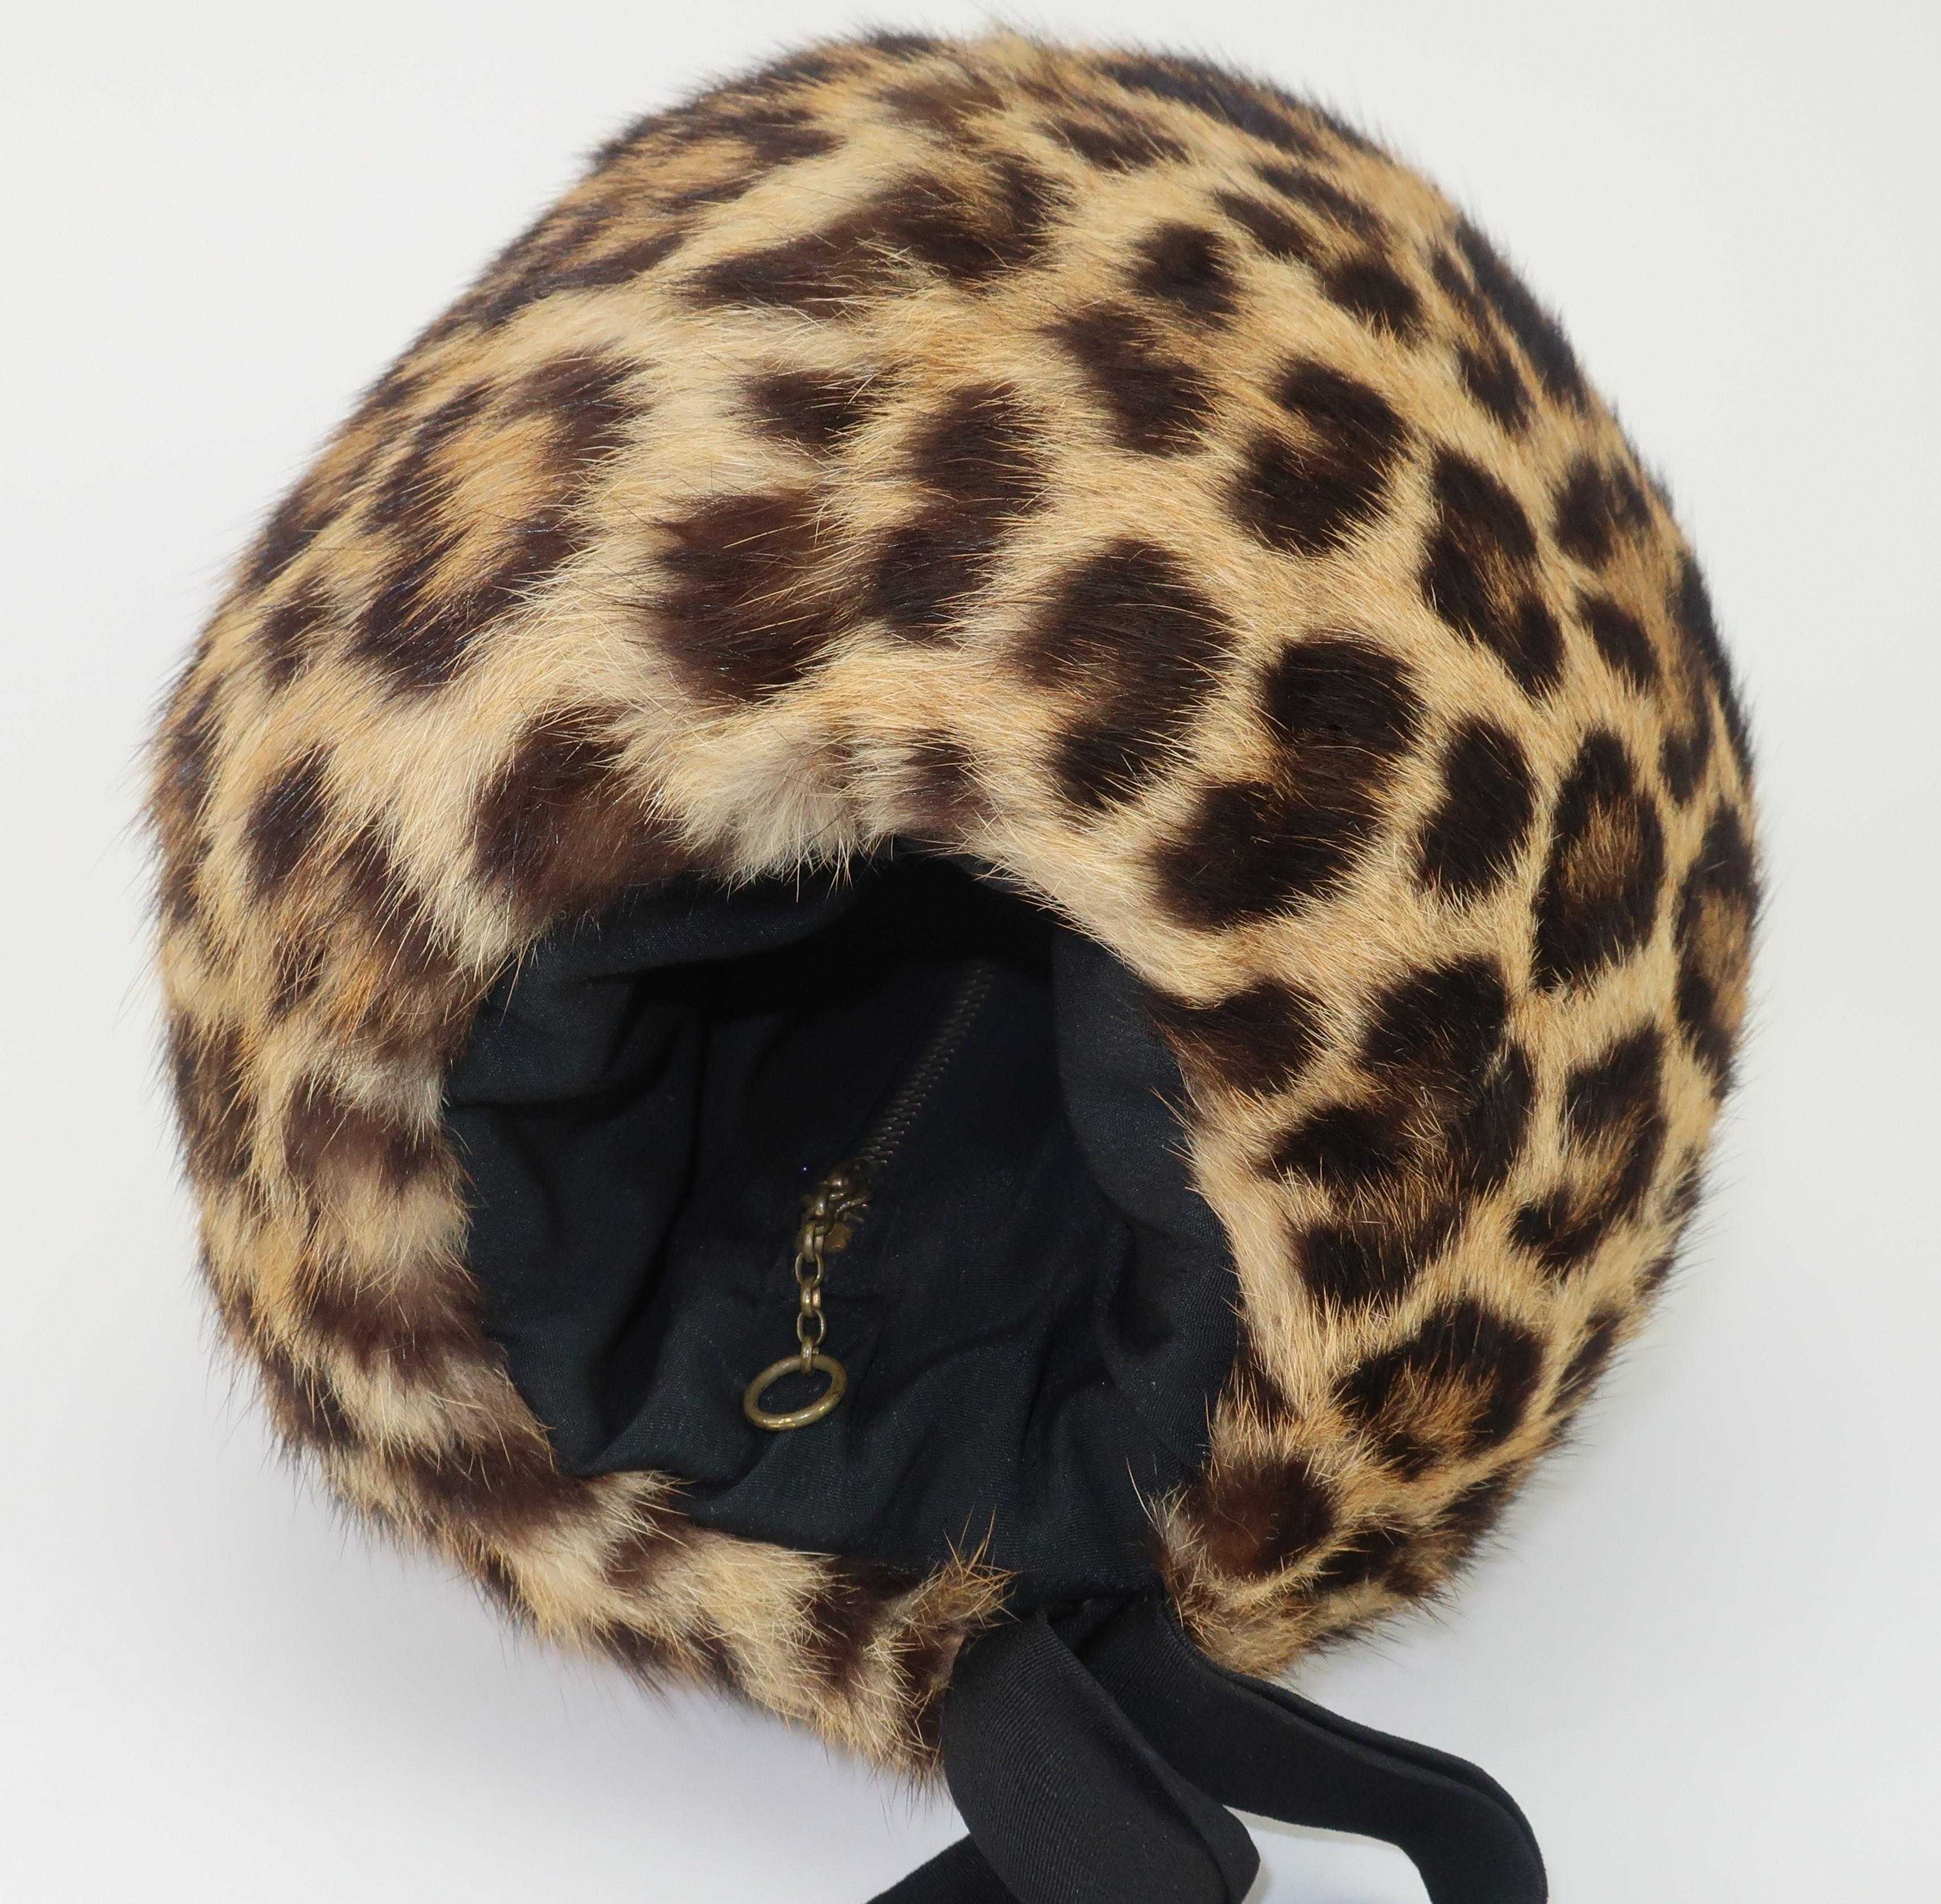 Muffs were a fashion accessory popular for their practical hand-warming use through the Victorian era. They fell out of favor in the early 20th century but enjoyed a glamorous revival from the 1930's through the 1950's. This 1950’s leopard printed